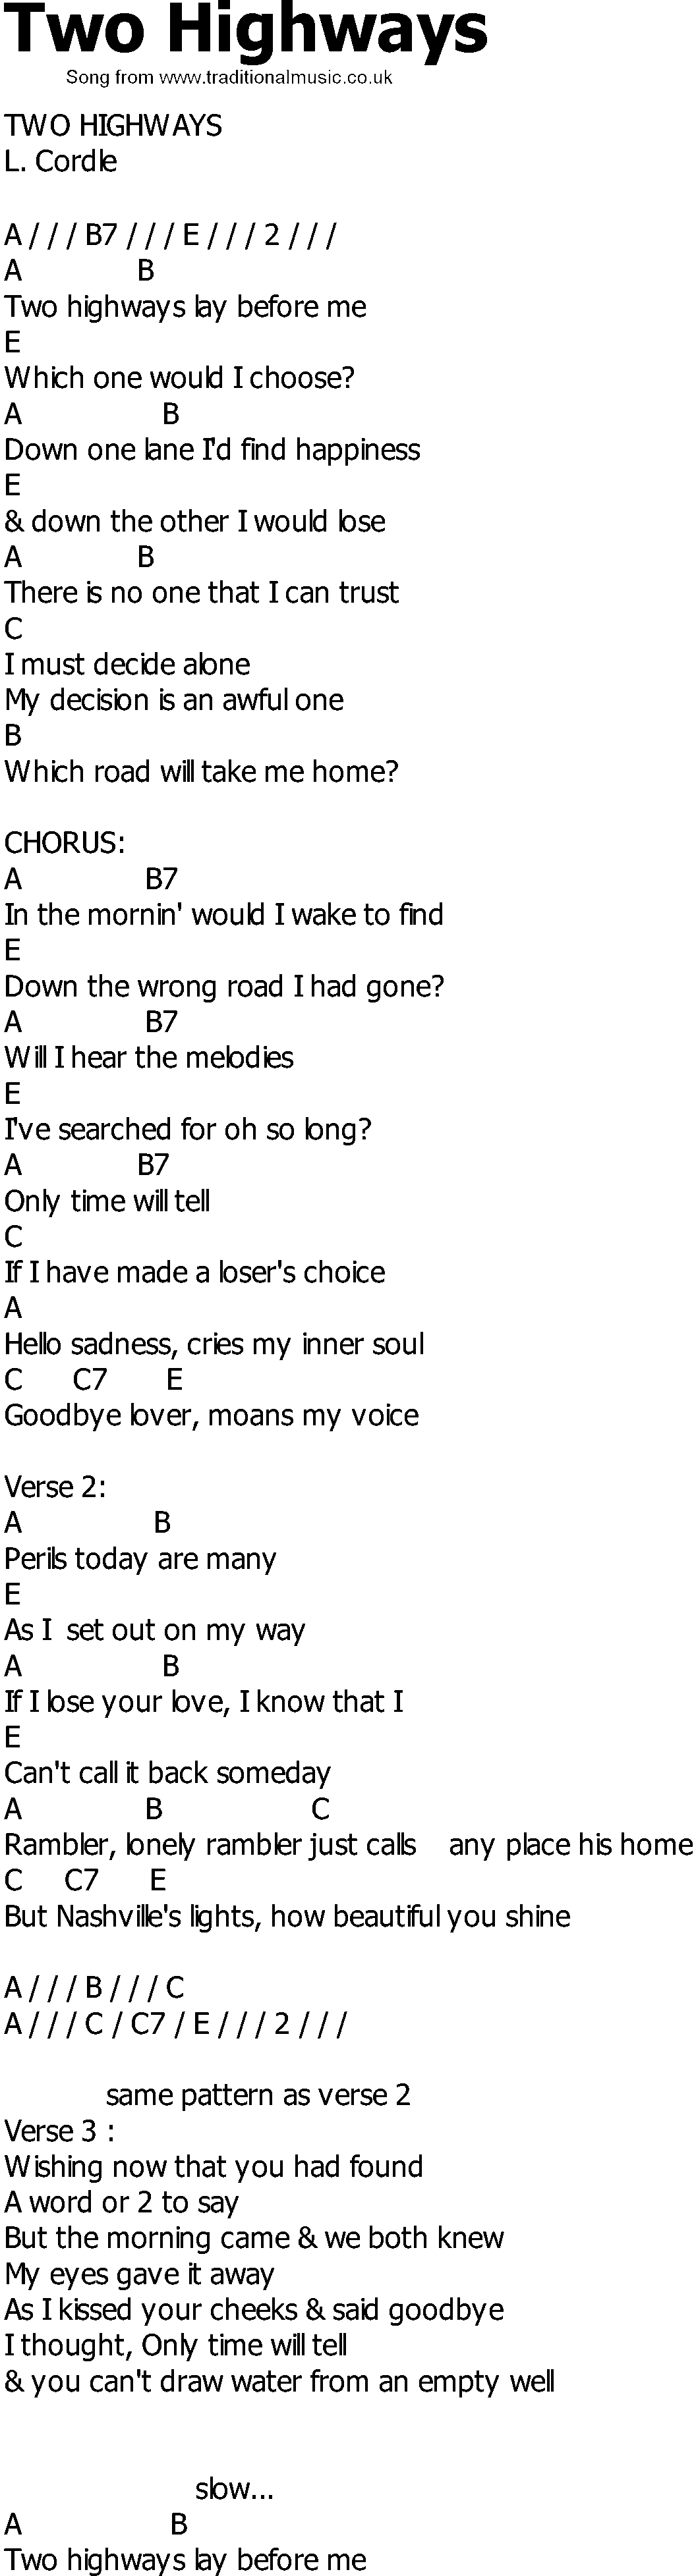 Old Country song lyrics with chords - Two Highways